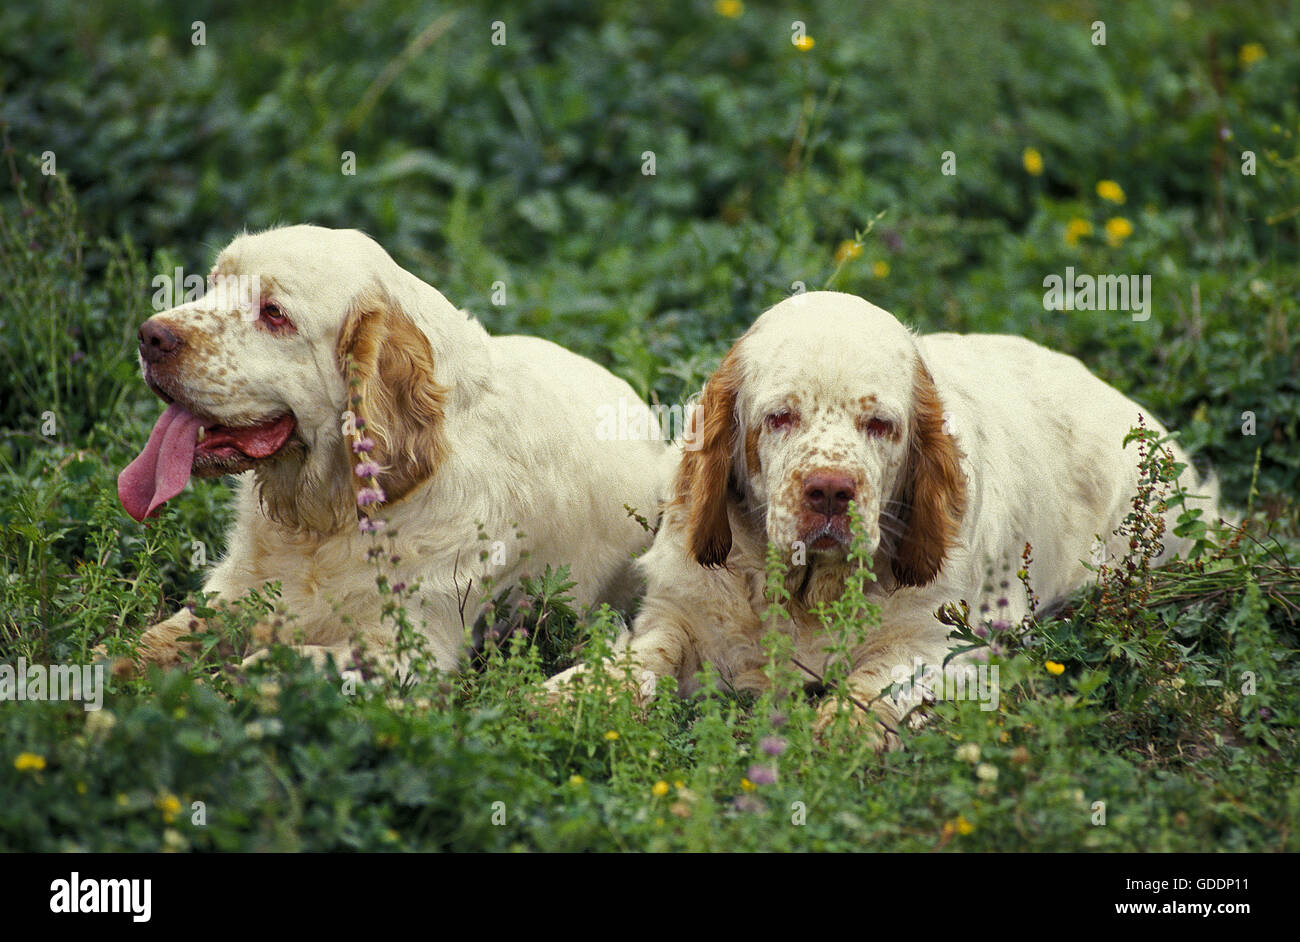 Clumber Spaniel laying on Grass Stock Photo